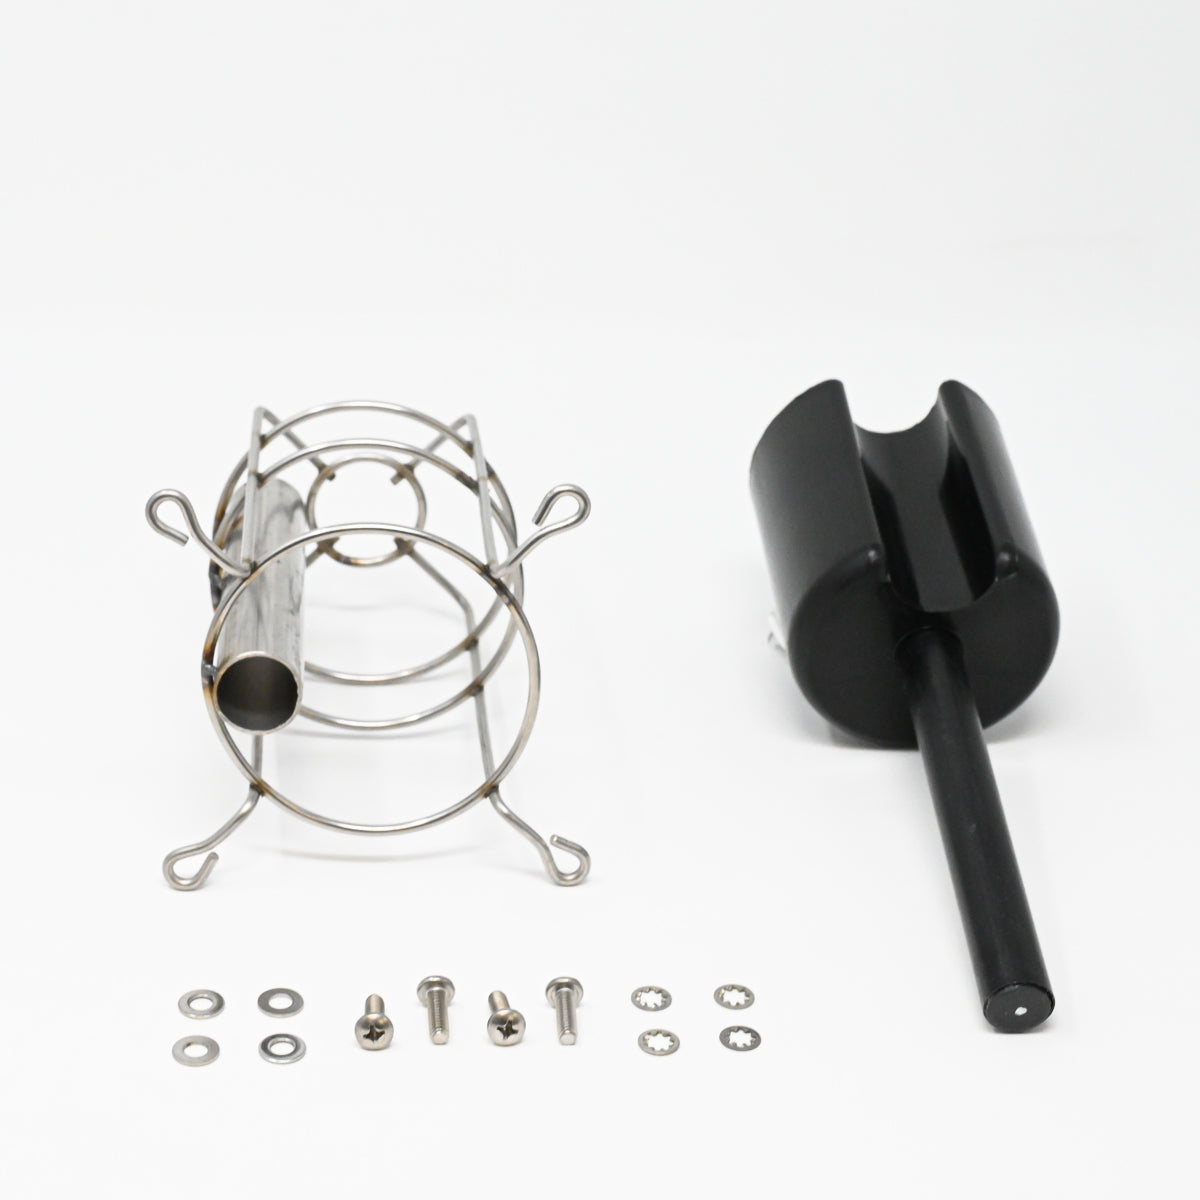 Float and housing assembly, screws and washers